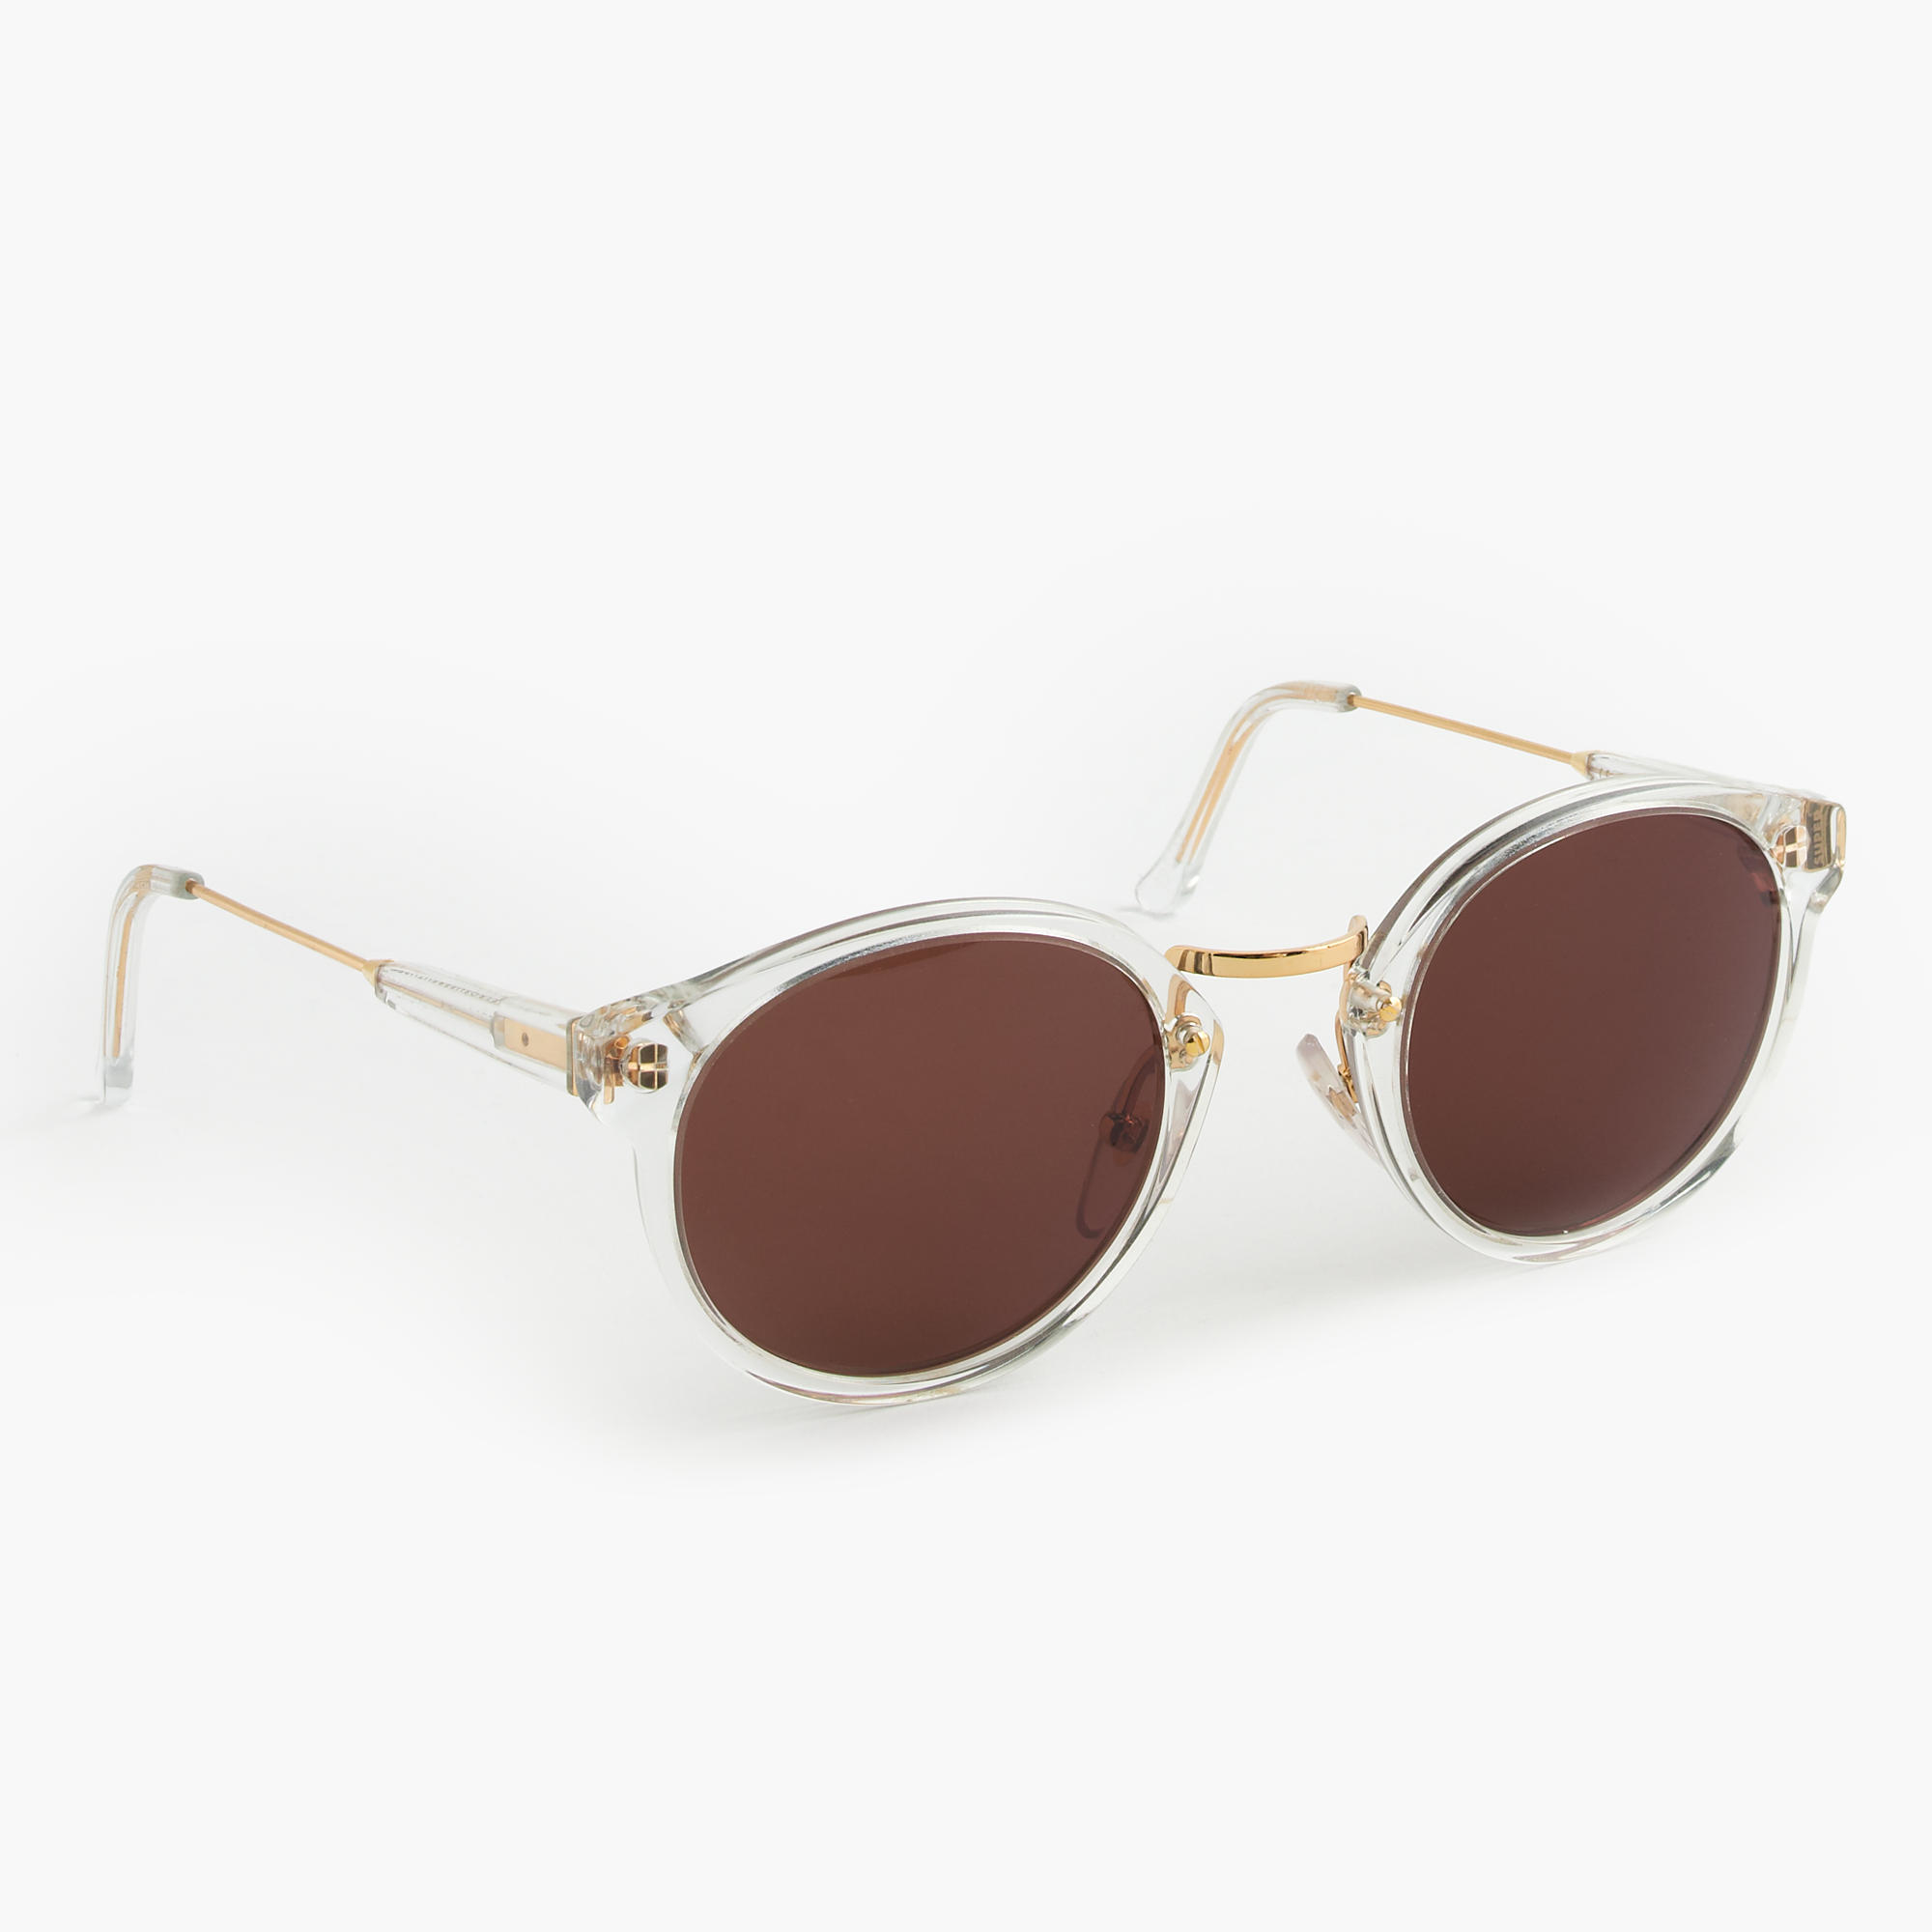 Lyst - J.Crew Super Retro Sunglasses With Clear Frame in Brown